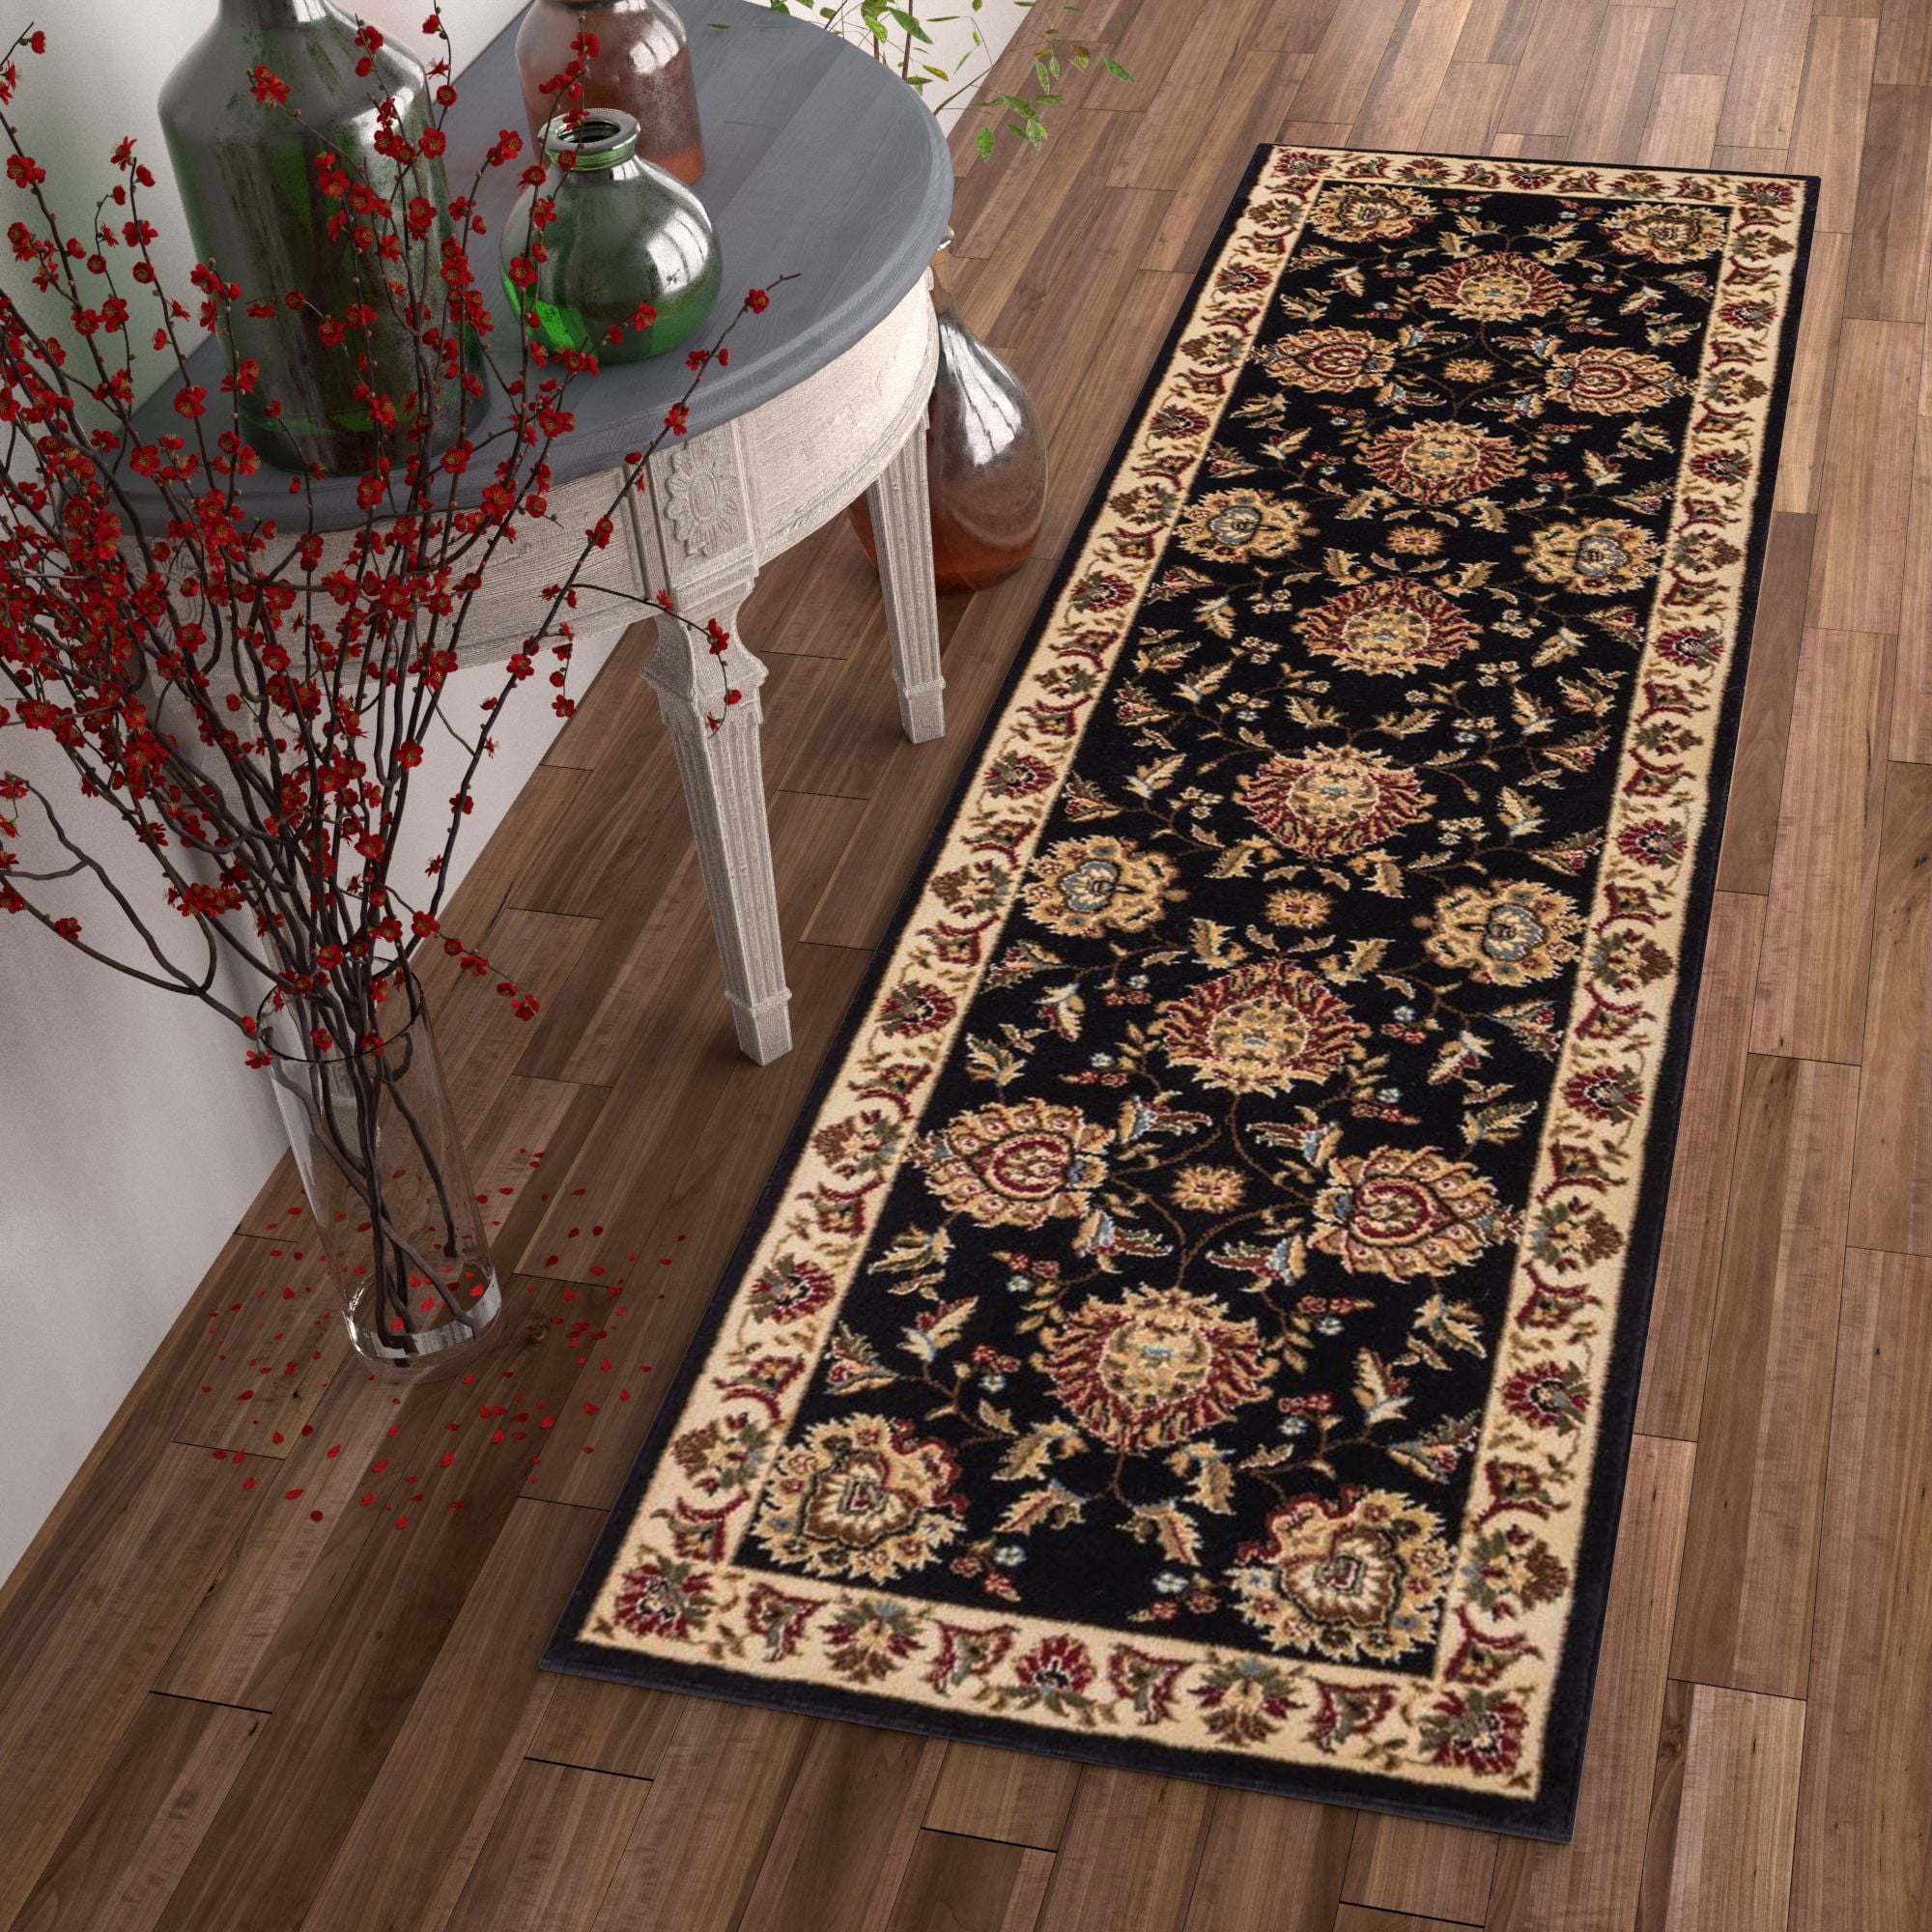 Easy to Clean Stain Fade Resistant Shed Free Modern Contemporary Transitional Soft Living Dining Room Rug Noble Sarouk Ivory Persian Floral Oriental Formal Traditional Rug 3x10 2'7 x 9'6 Runner 